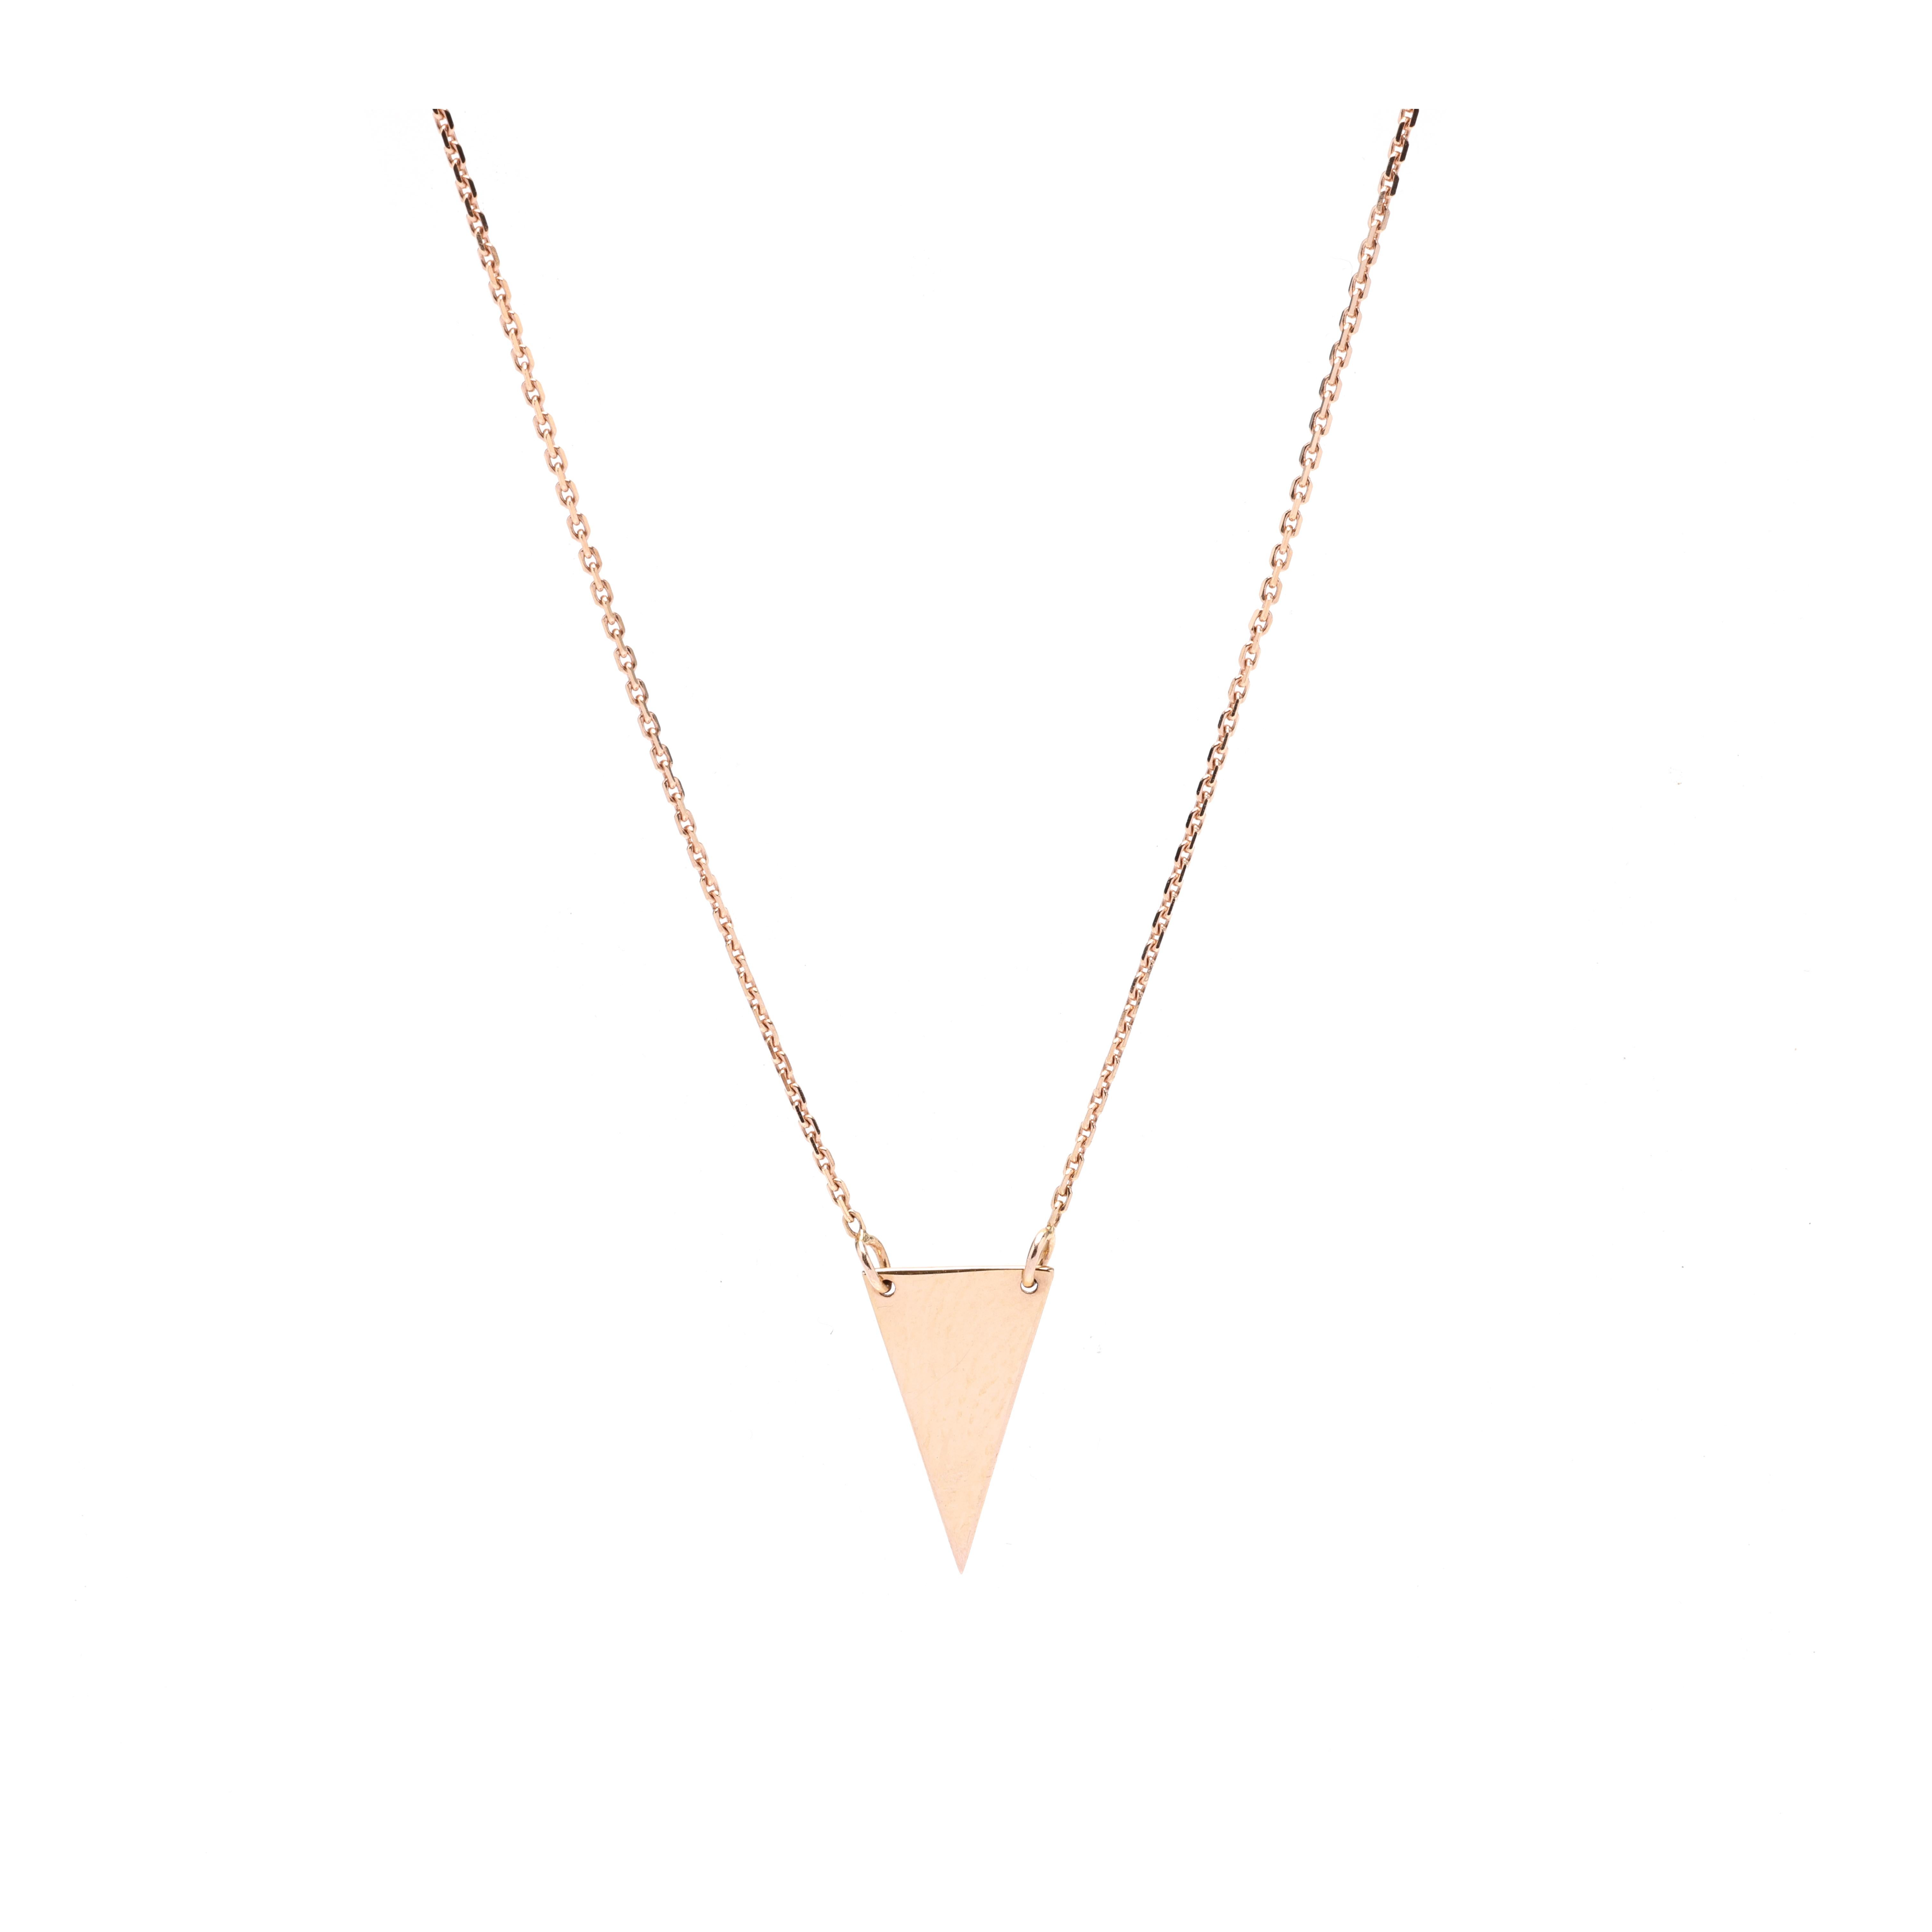 Women's or Men's 14K Rose Gold Triangle Necklace, Length 16-18 Inches, Pendant Necklace For Sale